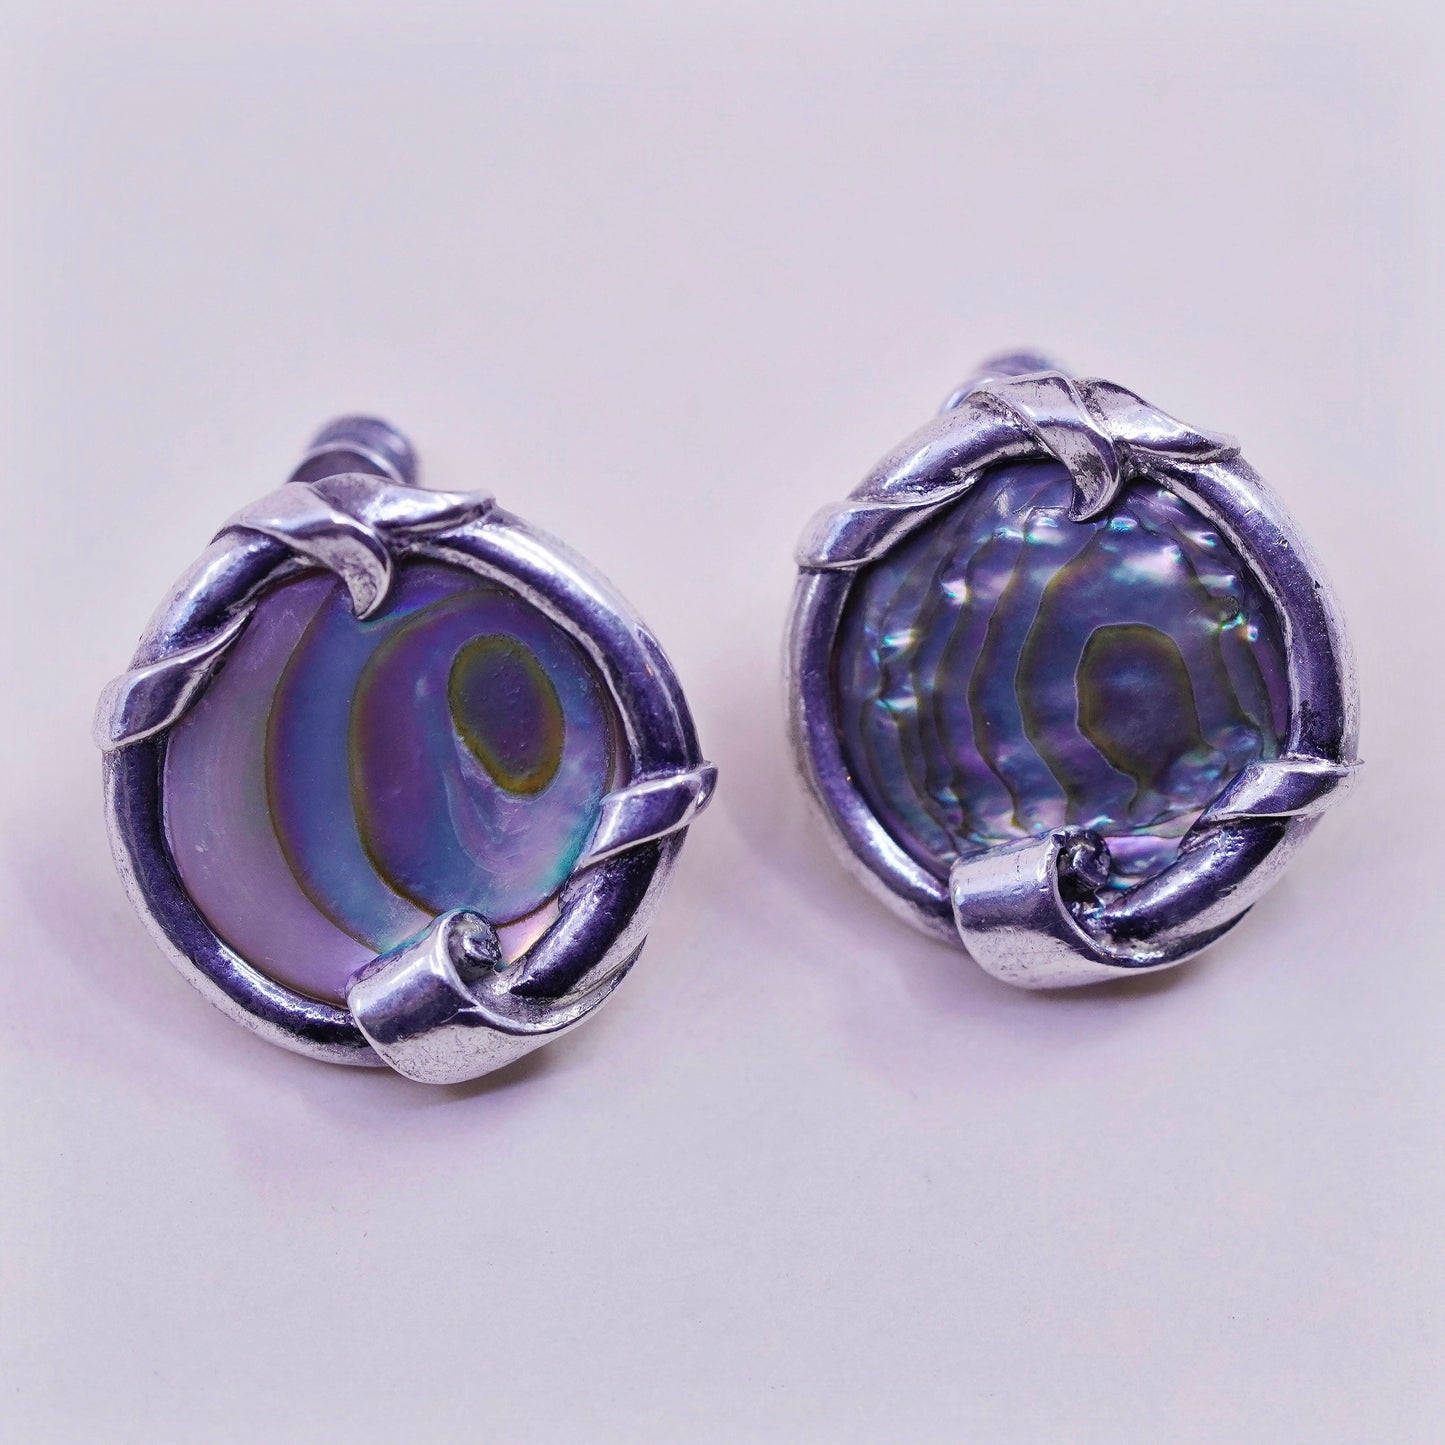 Vintage sterling 925 silver handmade screw back earrings with abalone